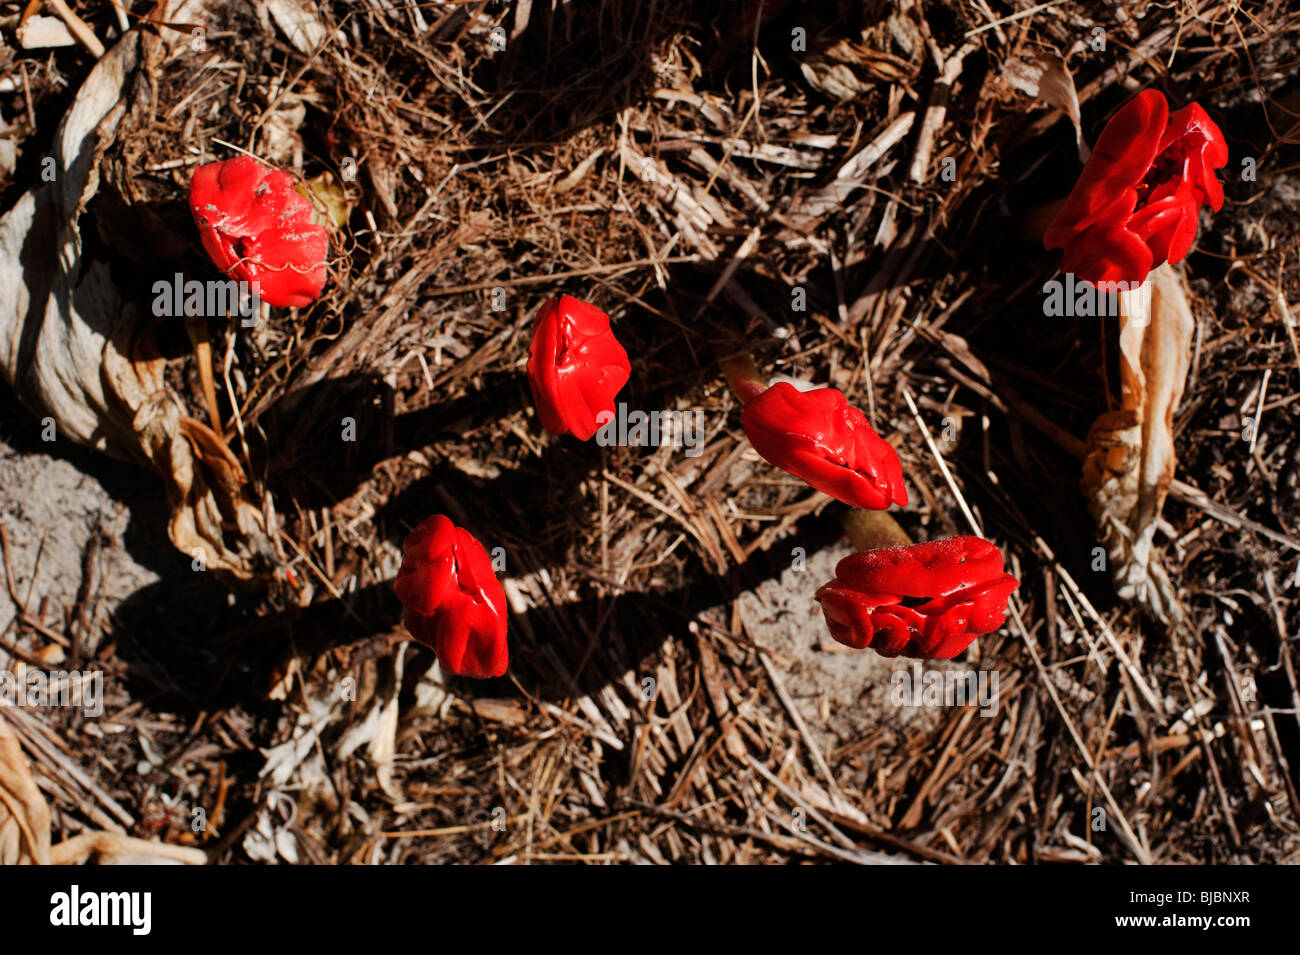 Blood lily (Haemanthus coccineus) coming up in the Autumn in a South Australian garden, Kangaroo Island, South Australia Stock Photo